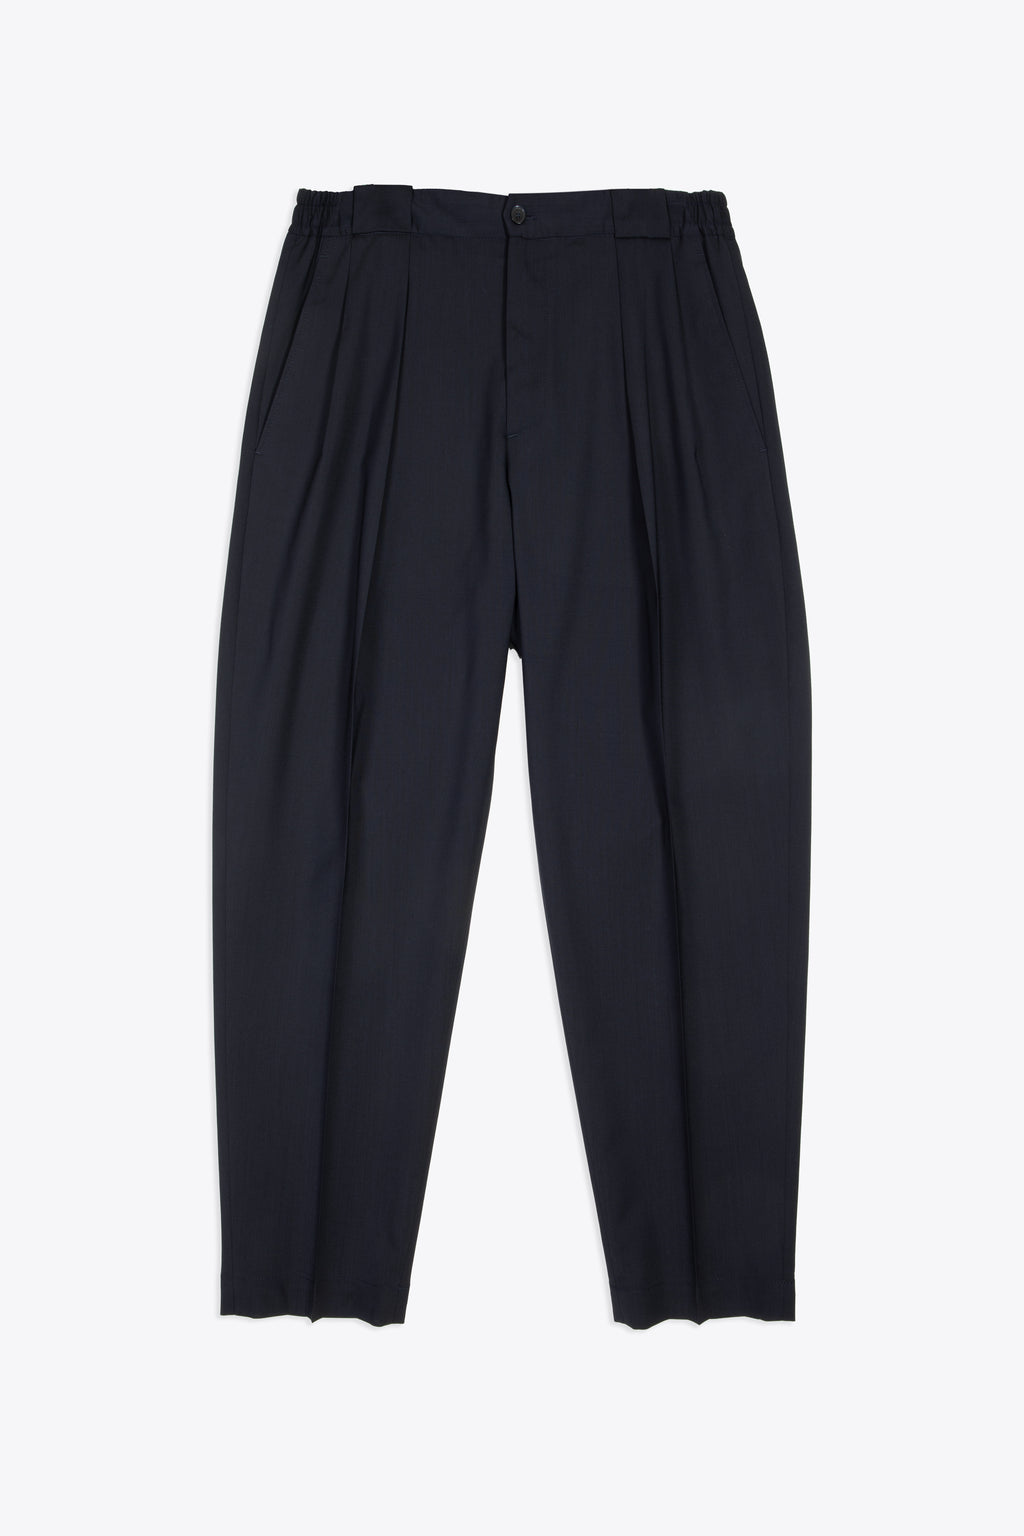 alt-image__Blue-tailored-wool-pleated-cropped-pant---Portobellos